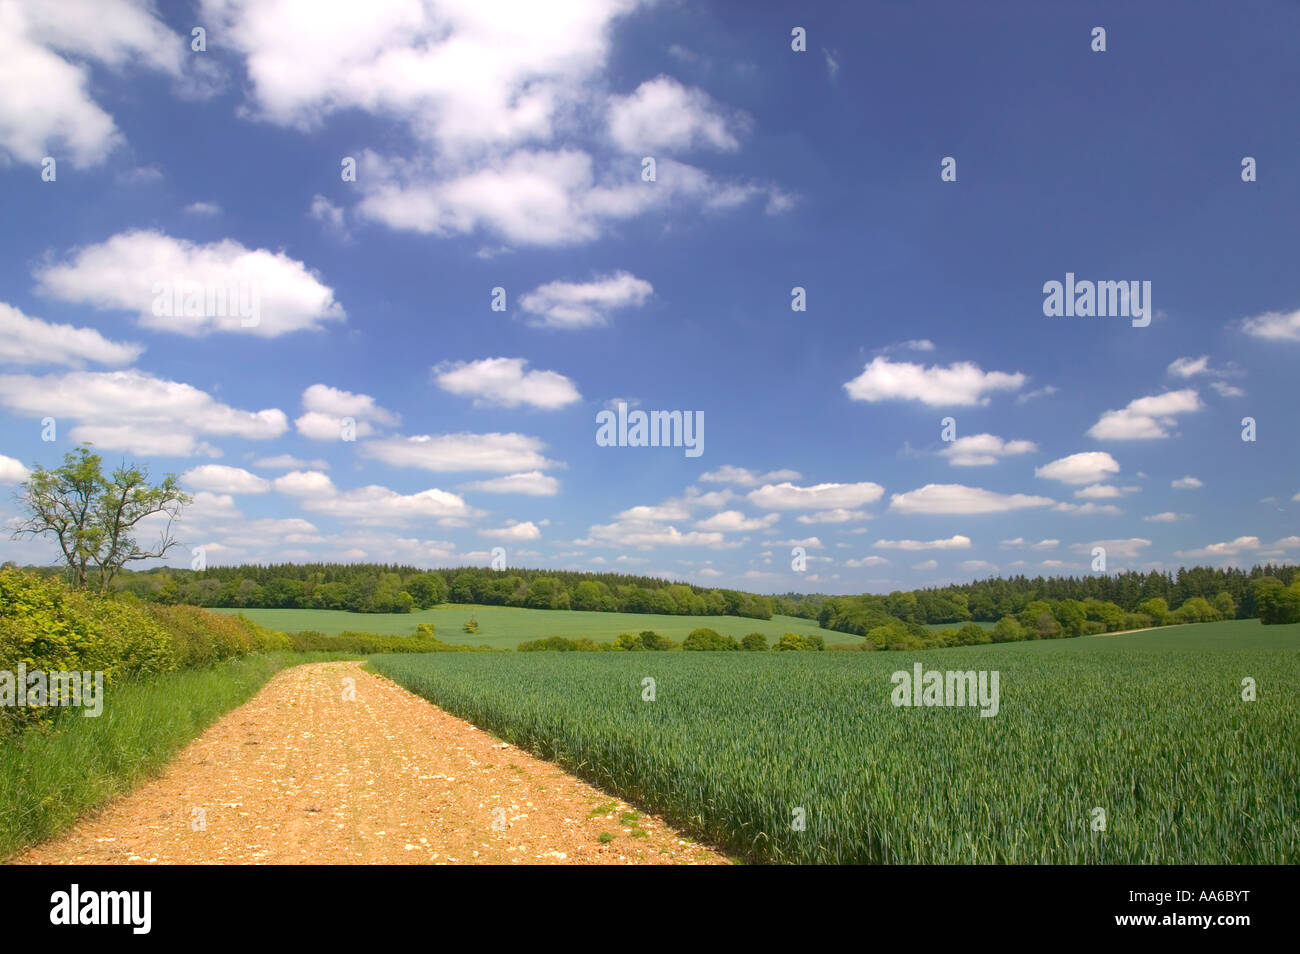 Tractor track around the edge of a wheat field landscape taken in a field in Hampshire, England. Stock Photo